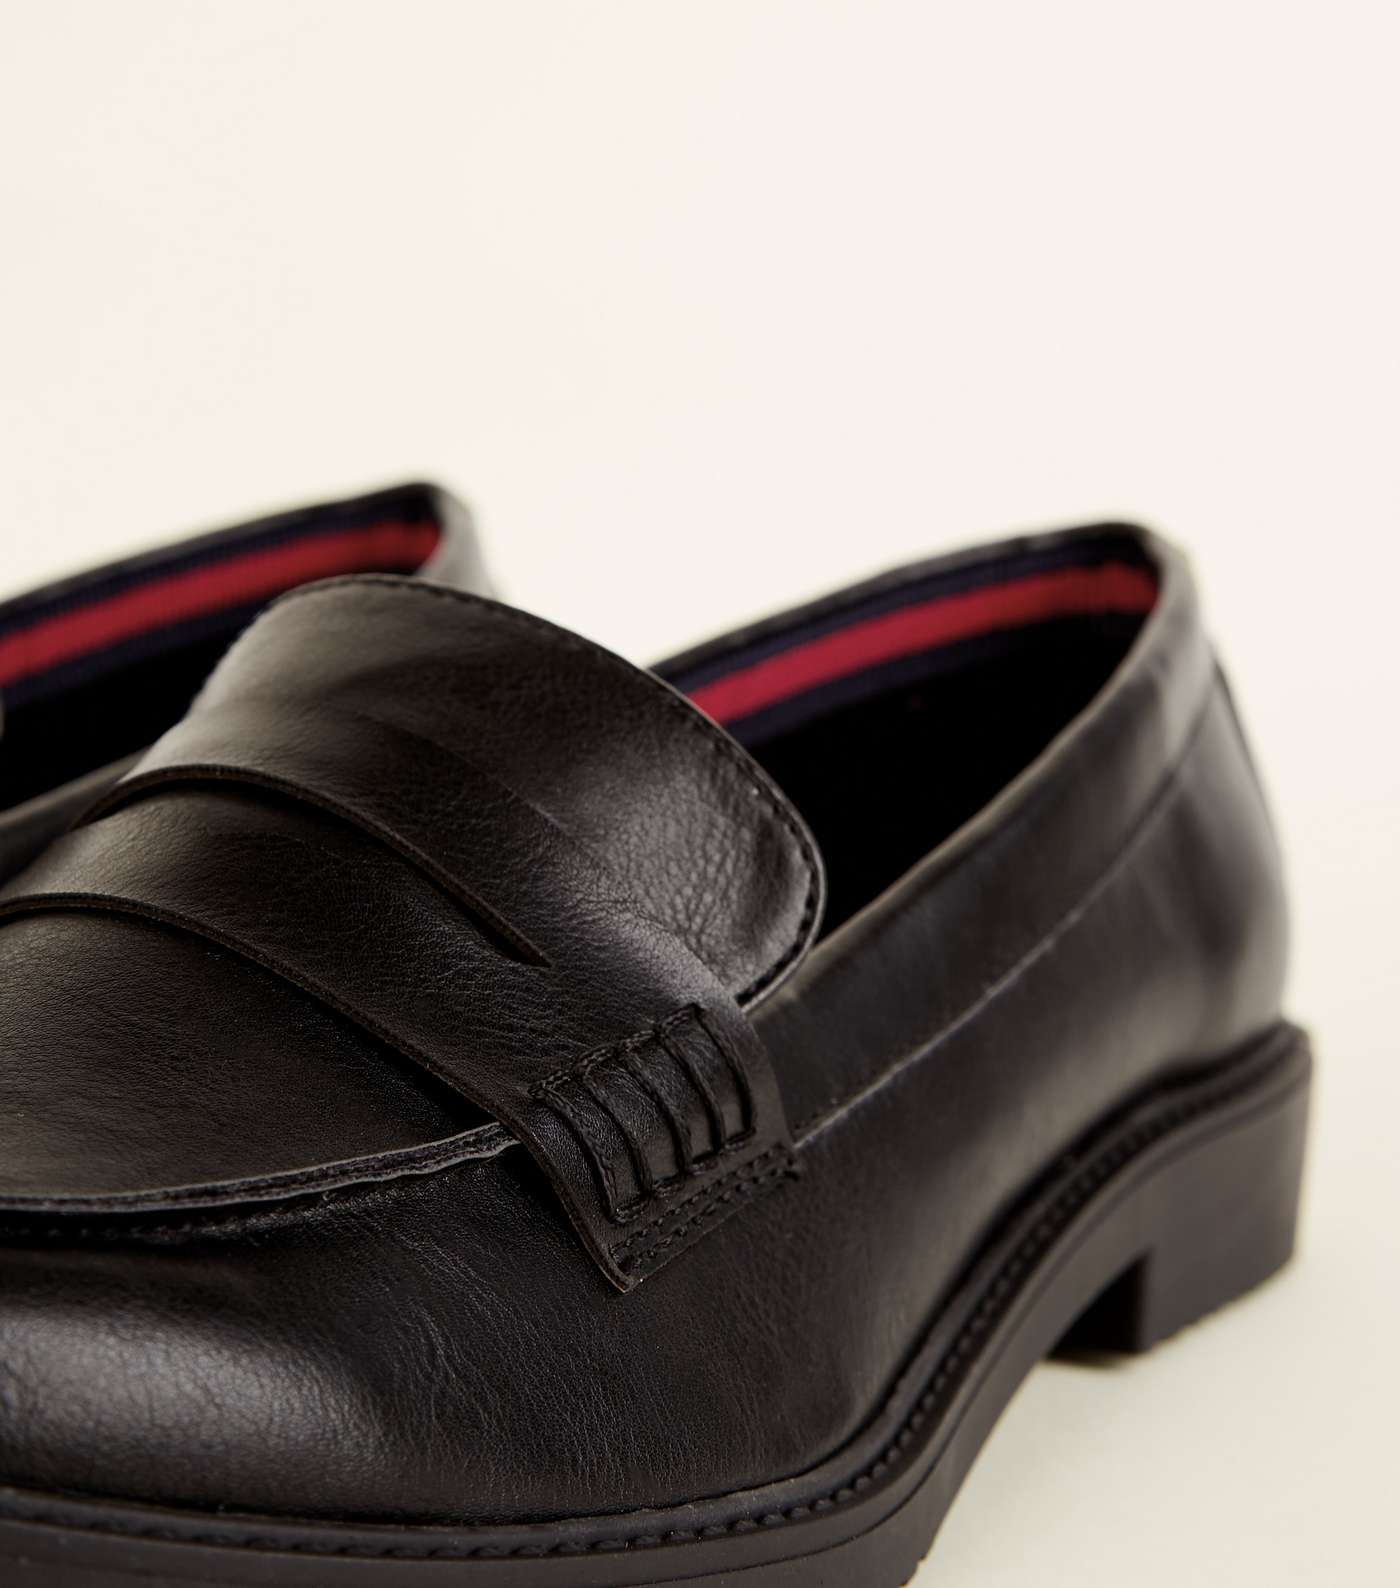 Wide Fit Black Leather-Look Penny Loafers Image 4